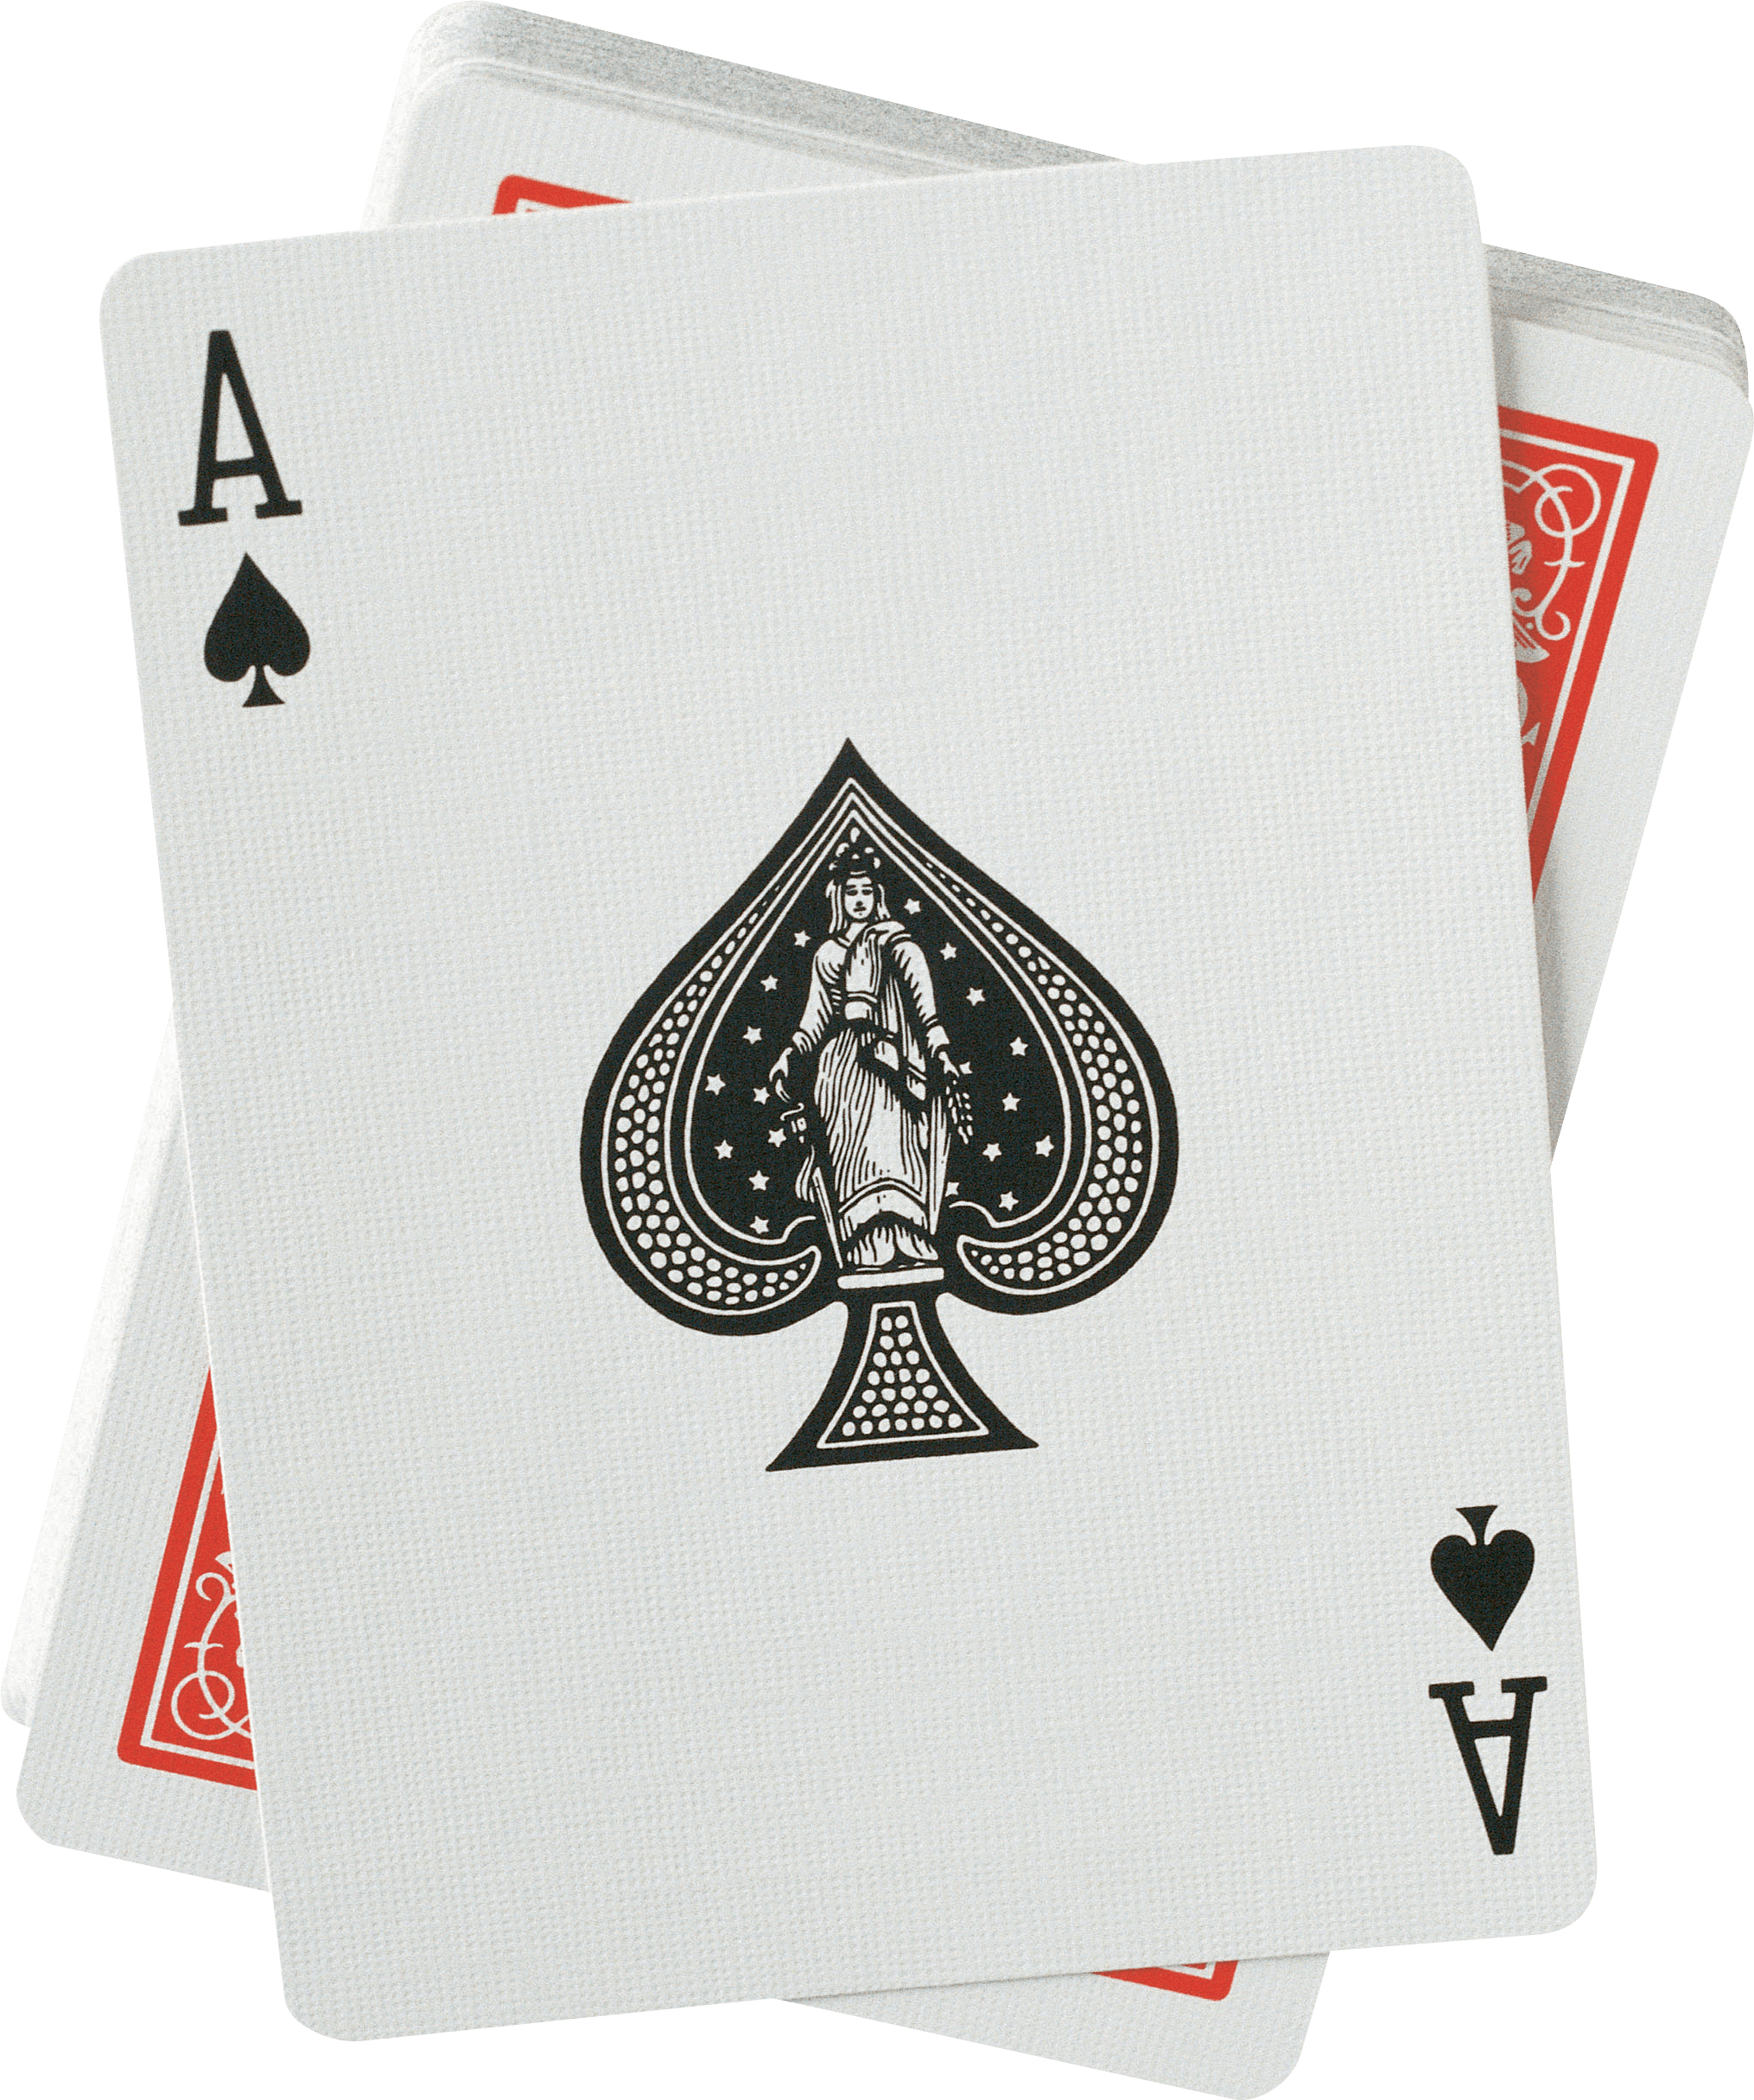 Download PNG image - Cards PNG File 